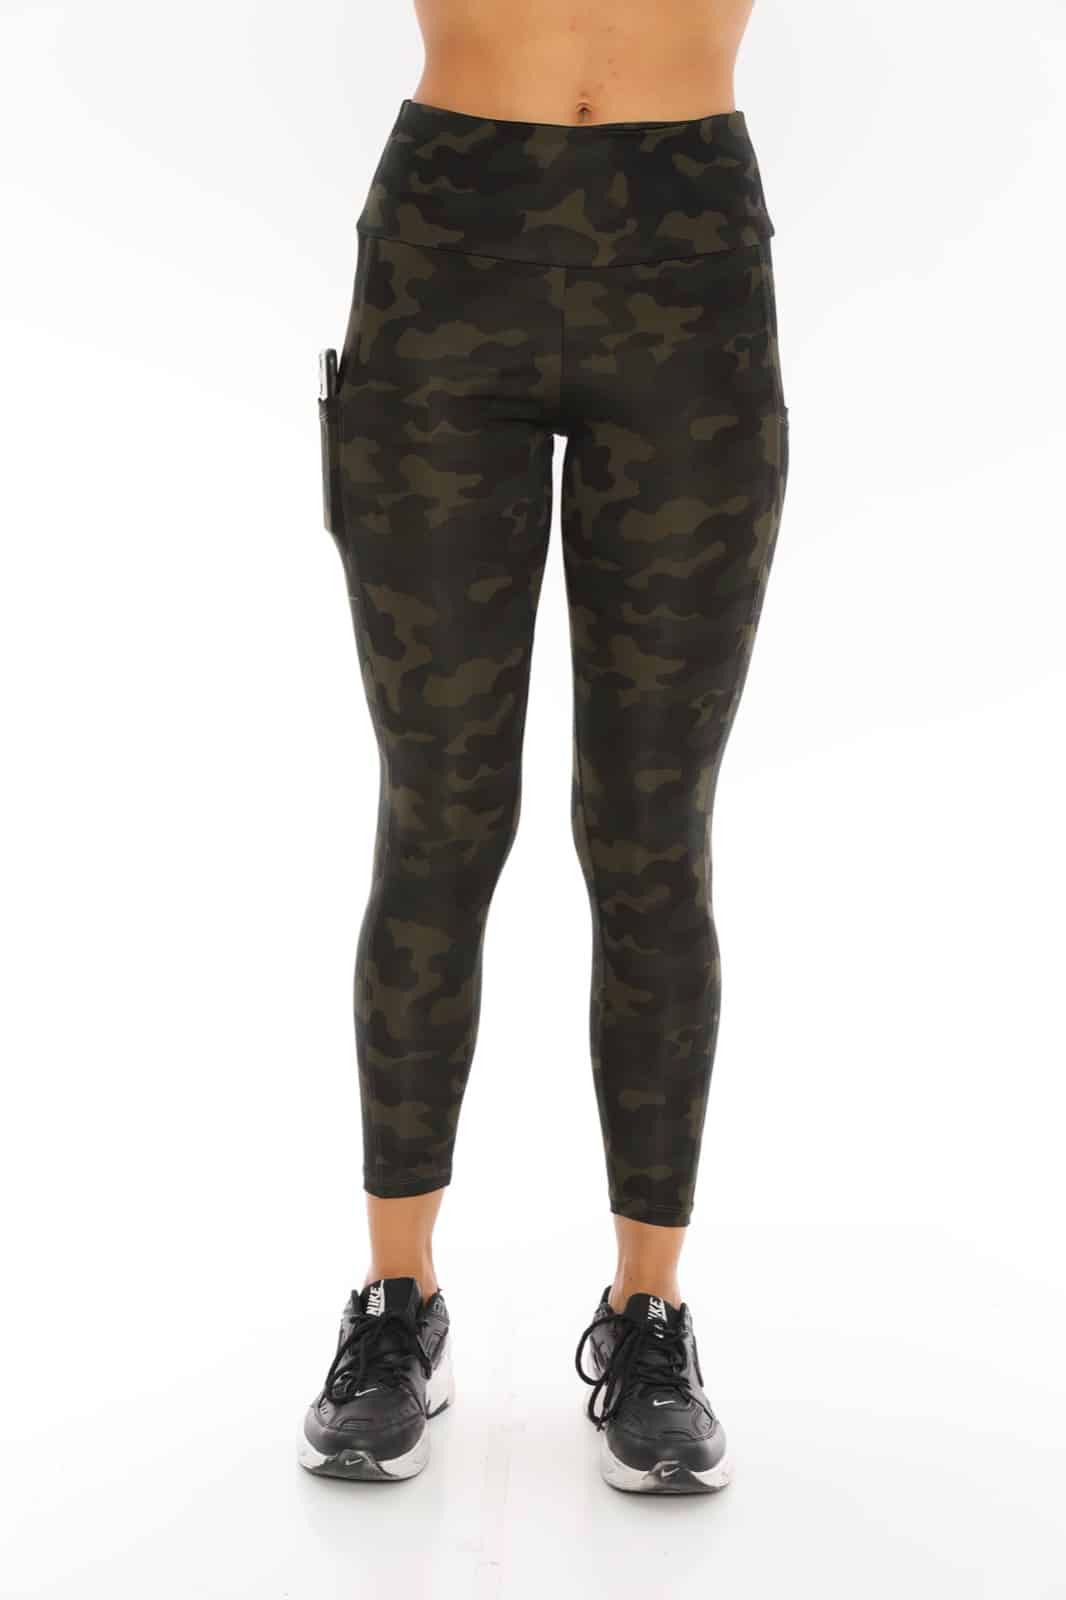 Activewear High Waisted Grey Color Camo Design Yoga Pants with Side Pockets  - Its All Leggings